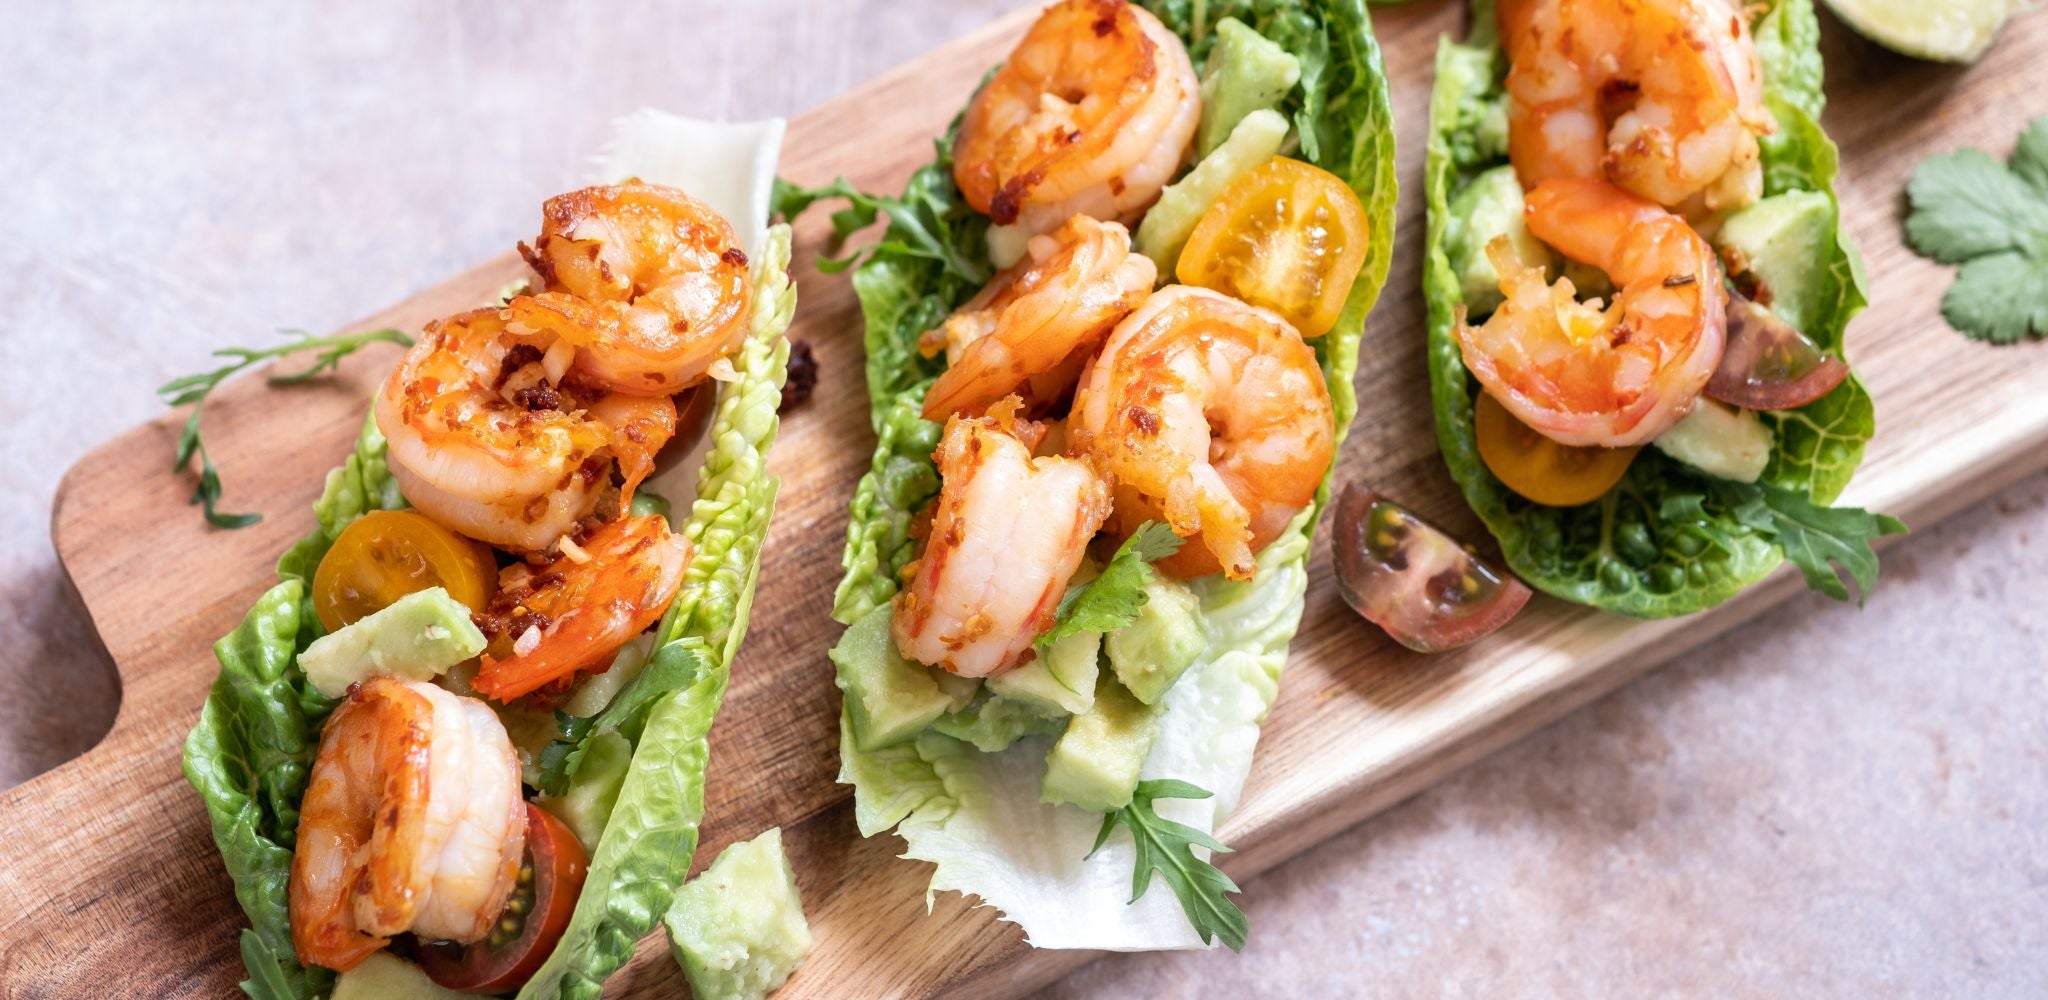 Shrimp on a lettuce taco shell, with delicious avocado and a drizzle of extra virgin olive oil